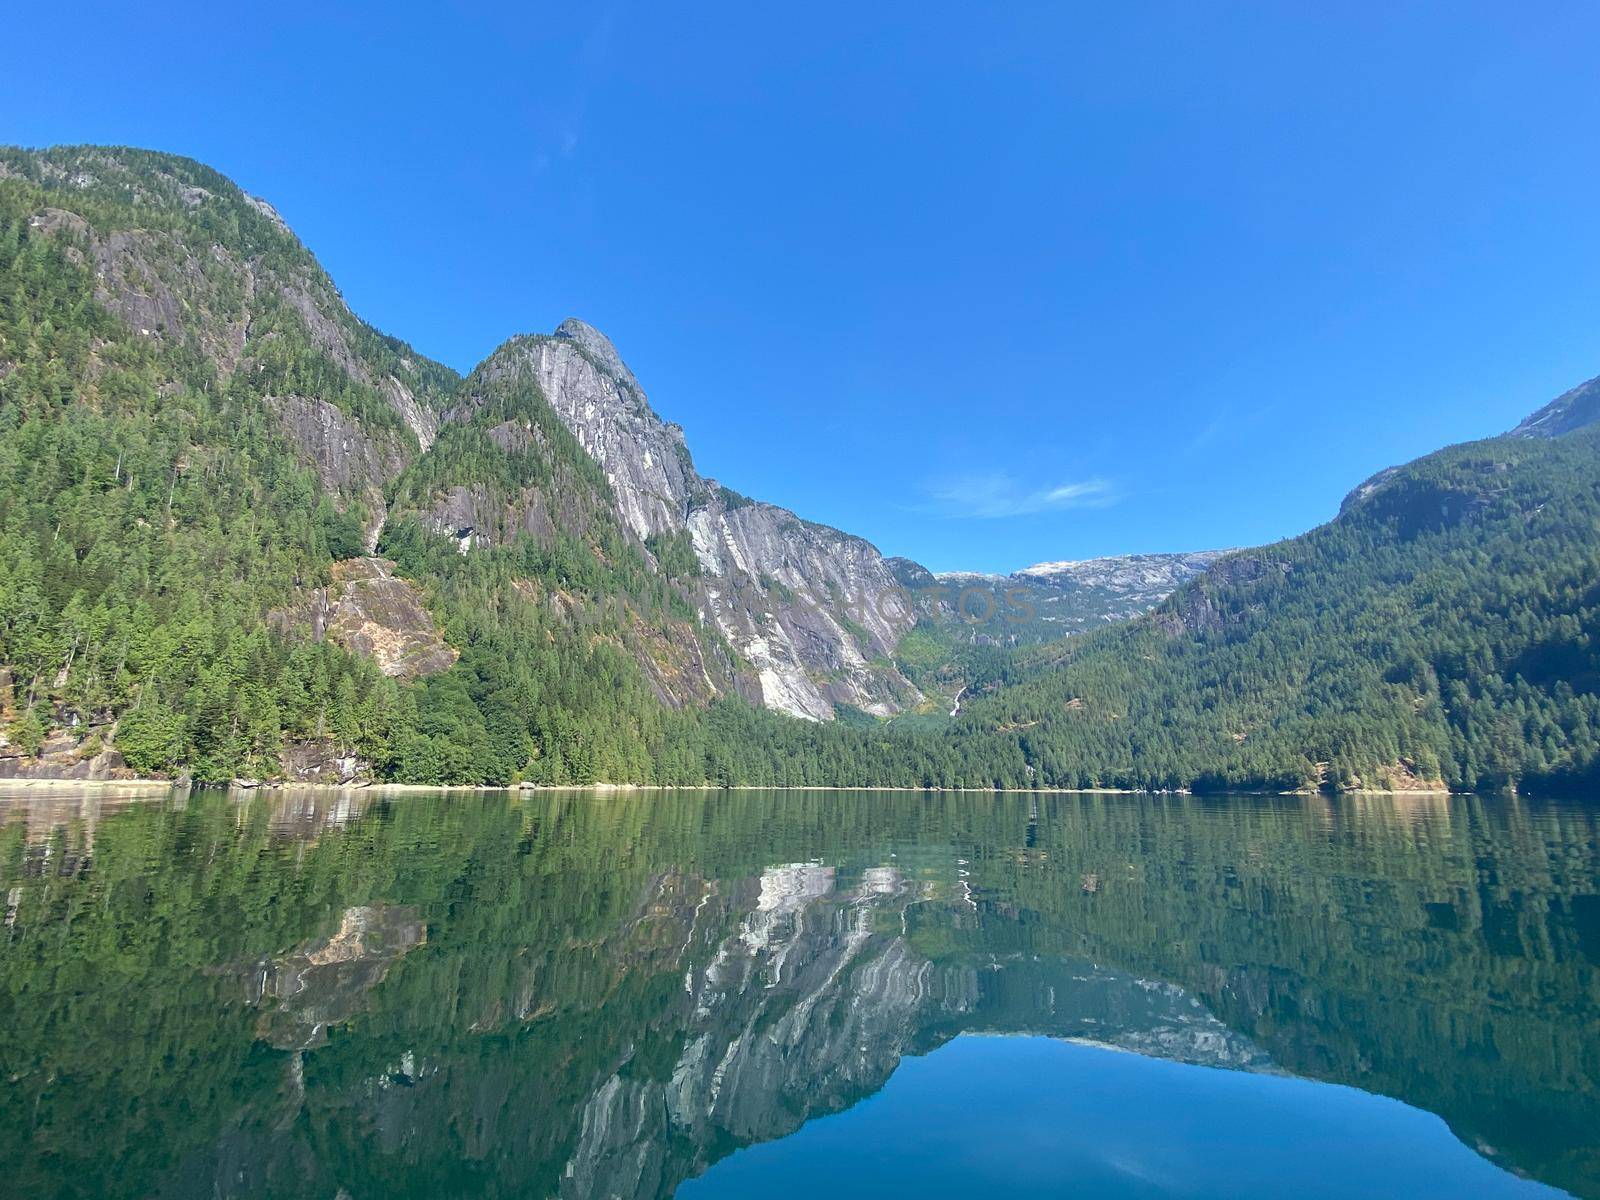 British Columbia Princess Louisa Inlet surrounded by high, rugged peaks of the Coast Mountains and beautiful water with endless blue skies by Granchinho